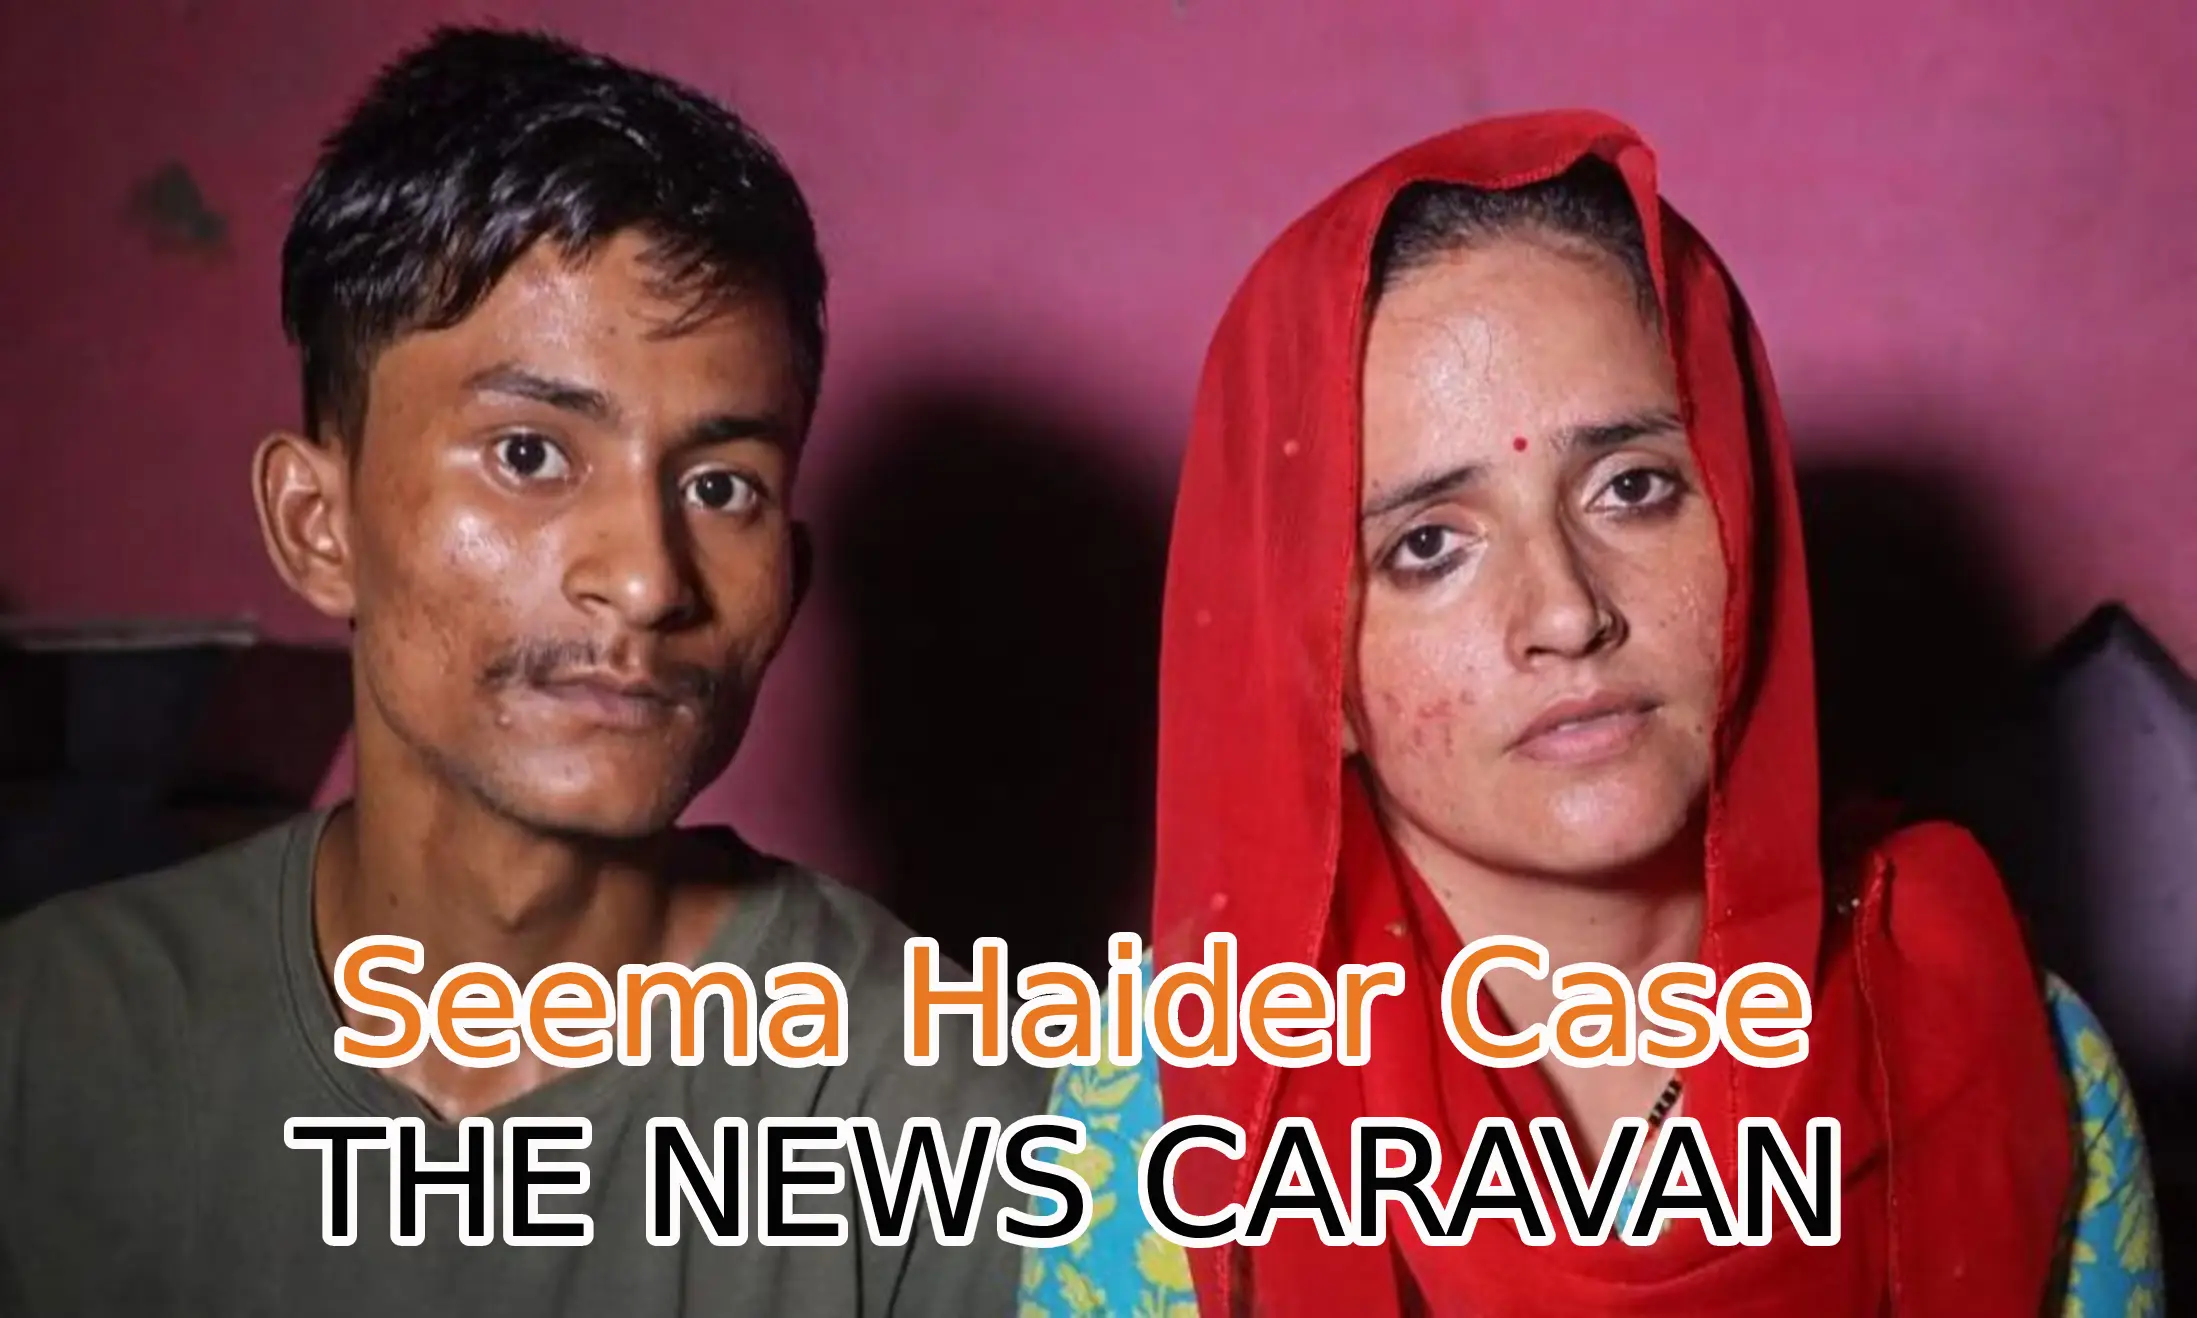 The Indian media is nowadays full of the story of Seema Haider, a Pakistani woman with 4 small children who has illegally entered India to be with her lover Sachin.